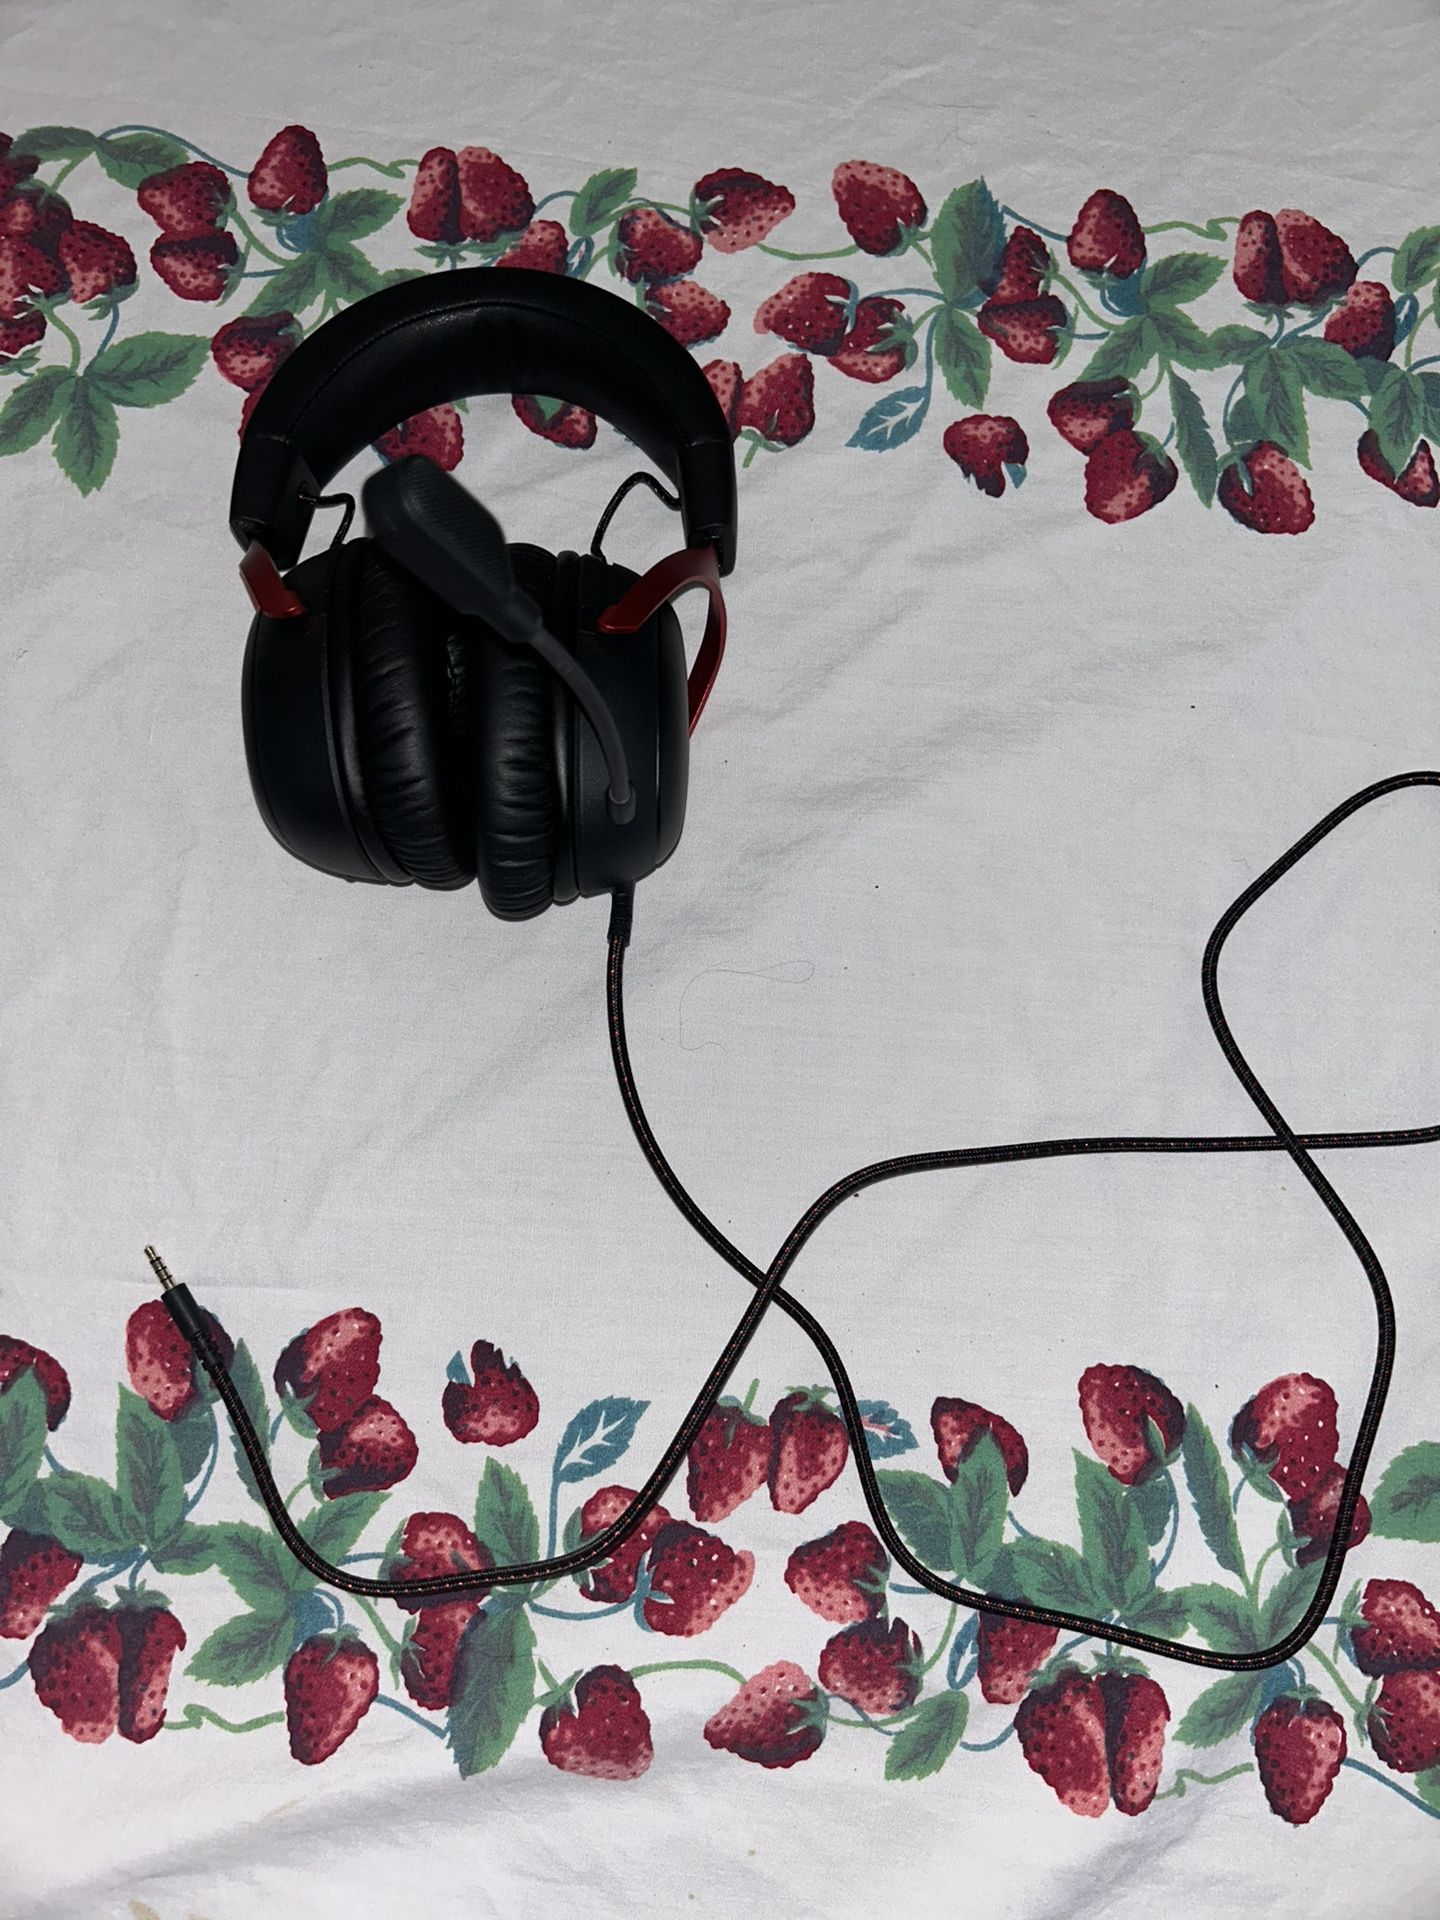 HyperX cloud 3 gaming headset Perfect condition 